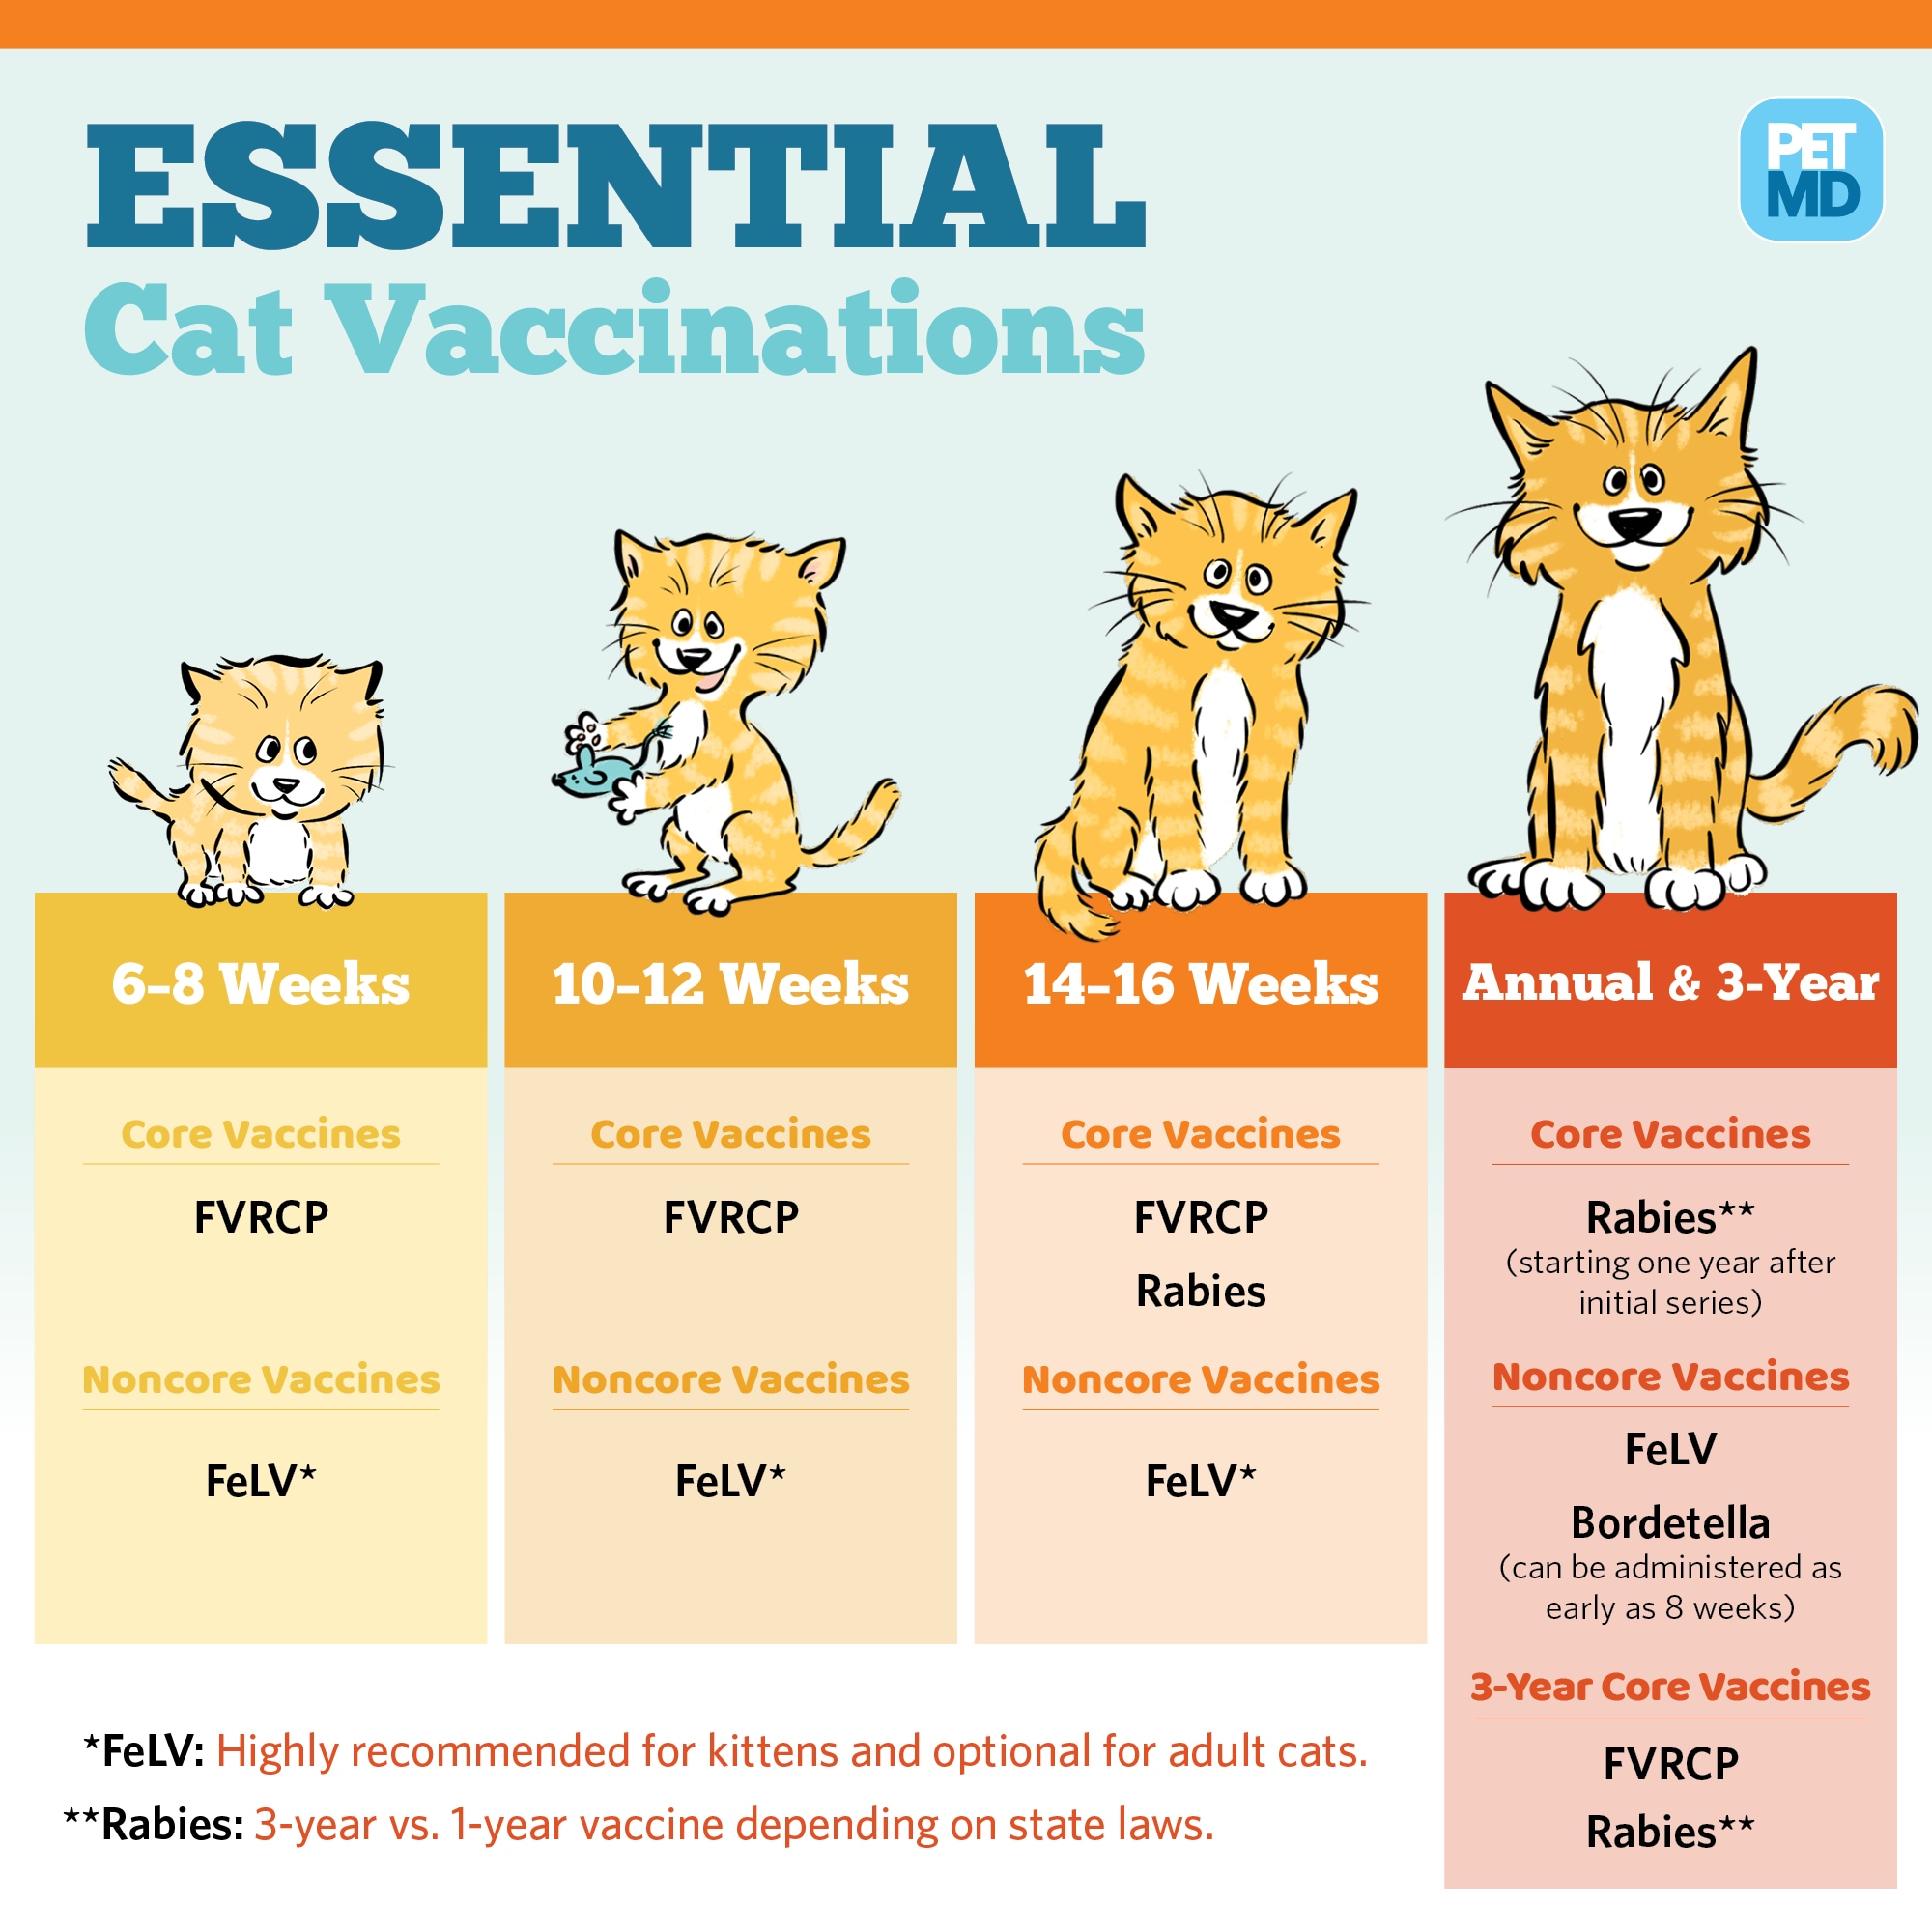 What Vaccines Are Important For Cats